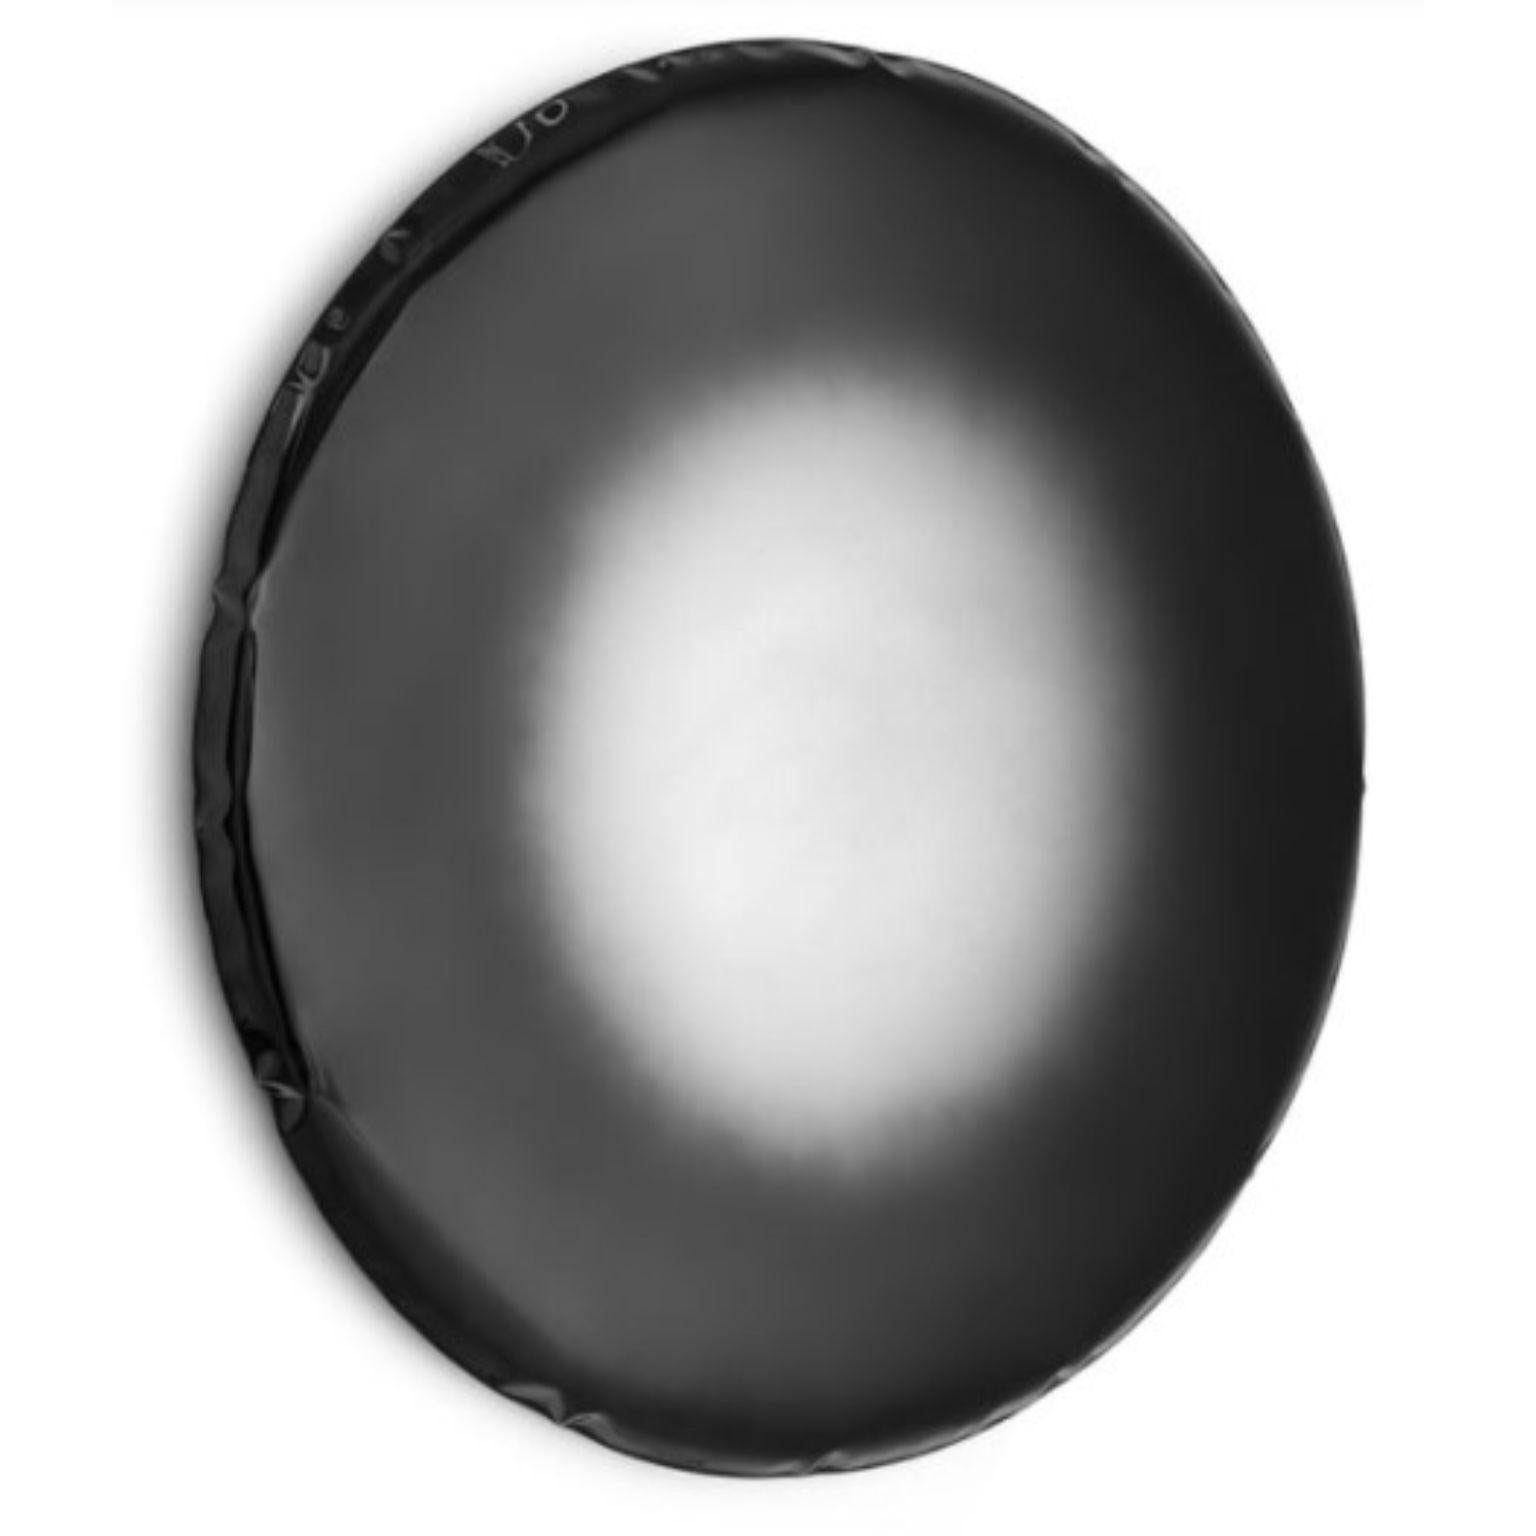 Dark Matter Oko 36 sculptural wall mirror by Zieta
Dimensions: diameter 36 x deep 6 cm 
Material: Stainless steel. 
Finish: Dark Matter.
Available in finishes: stainless steel, deep space blue, emerald, sapphire, sapphire/emerald, dark matter, and